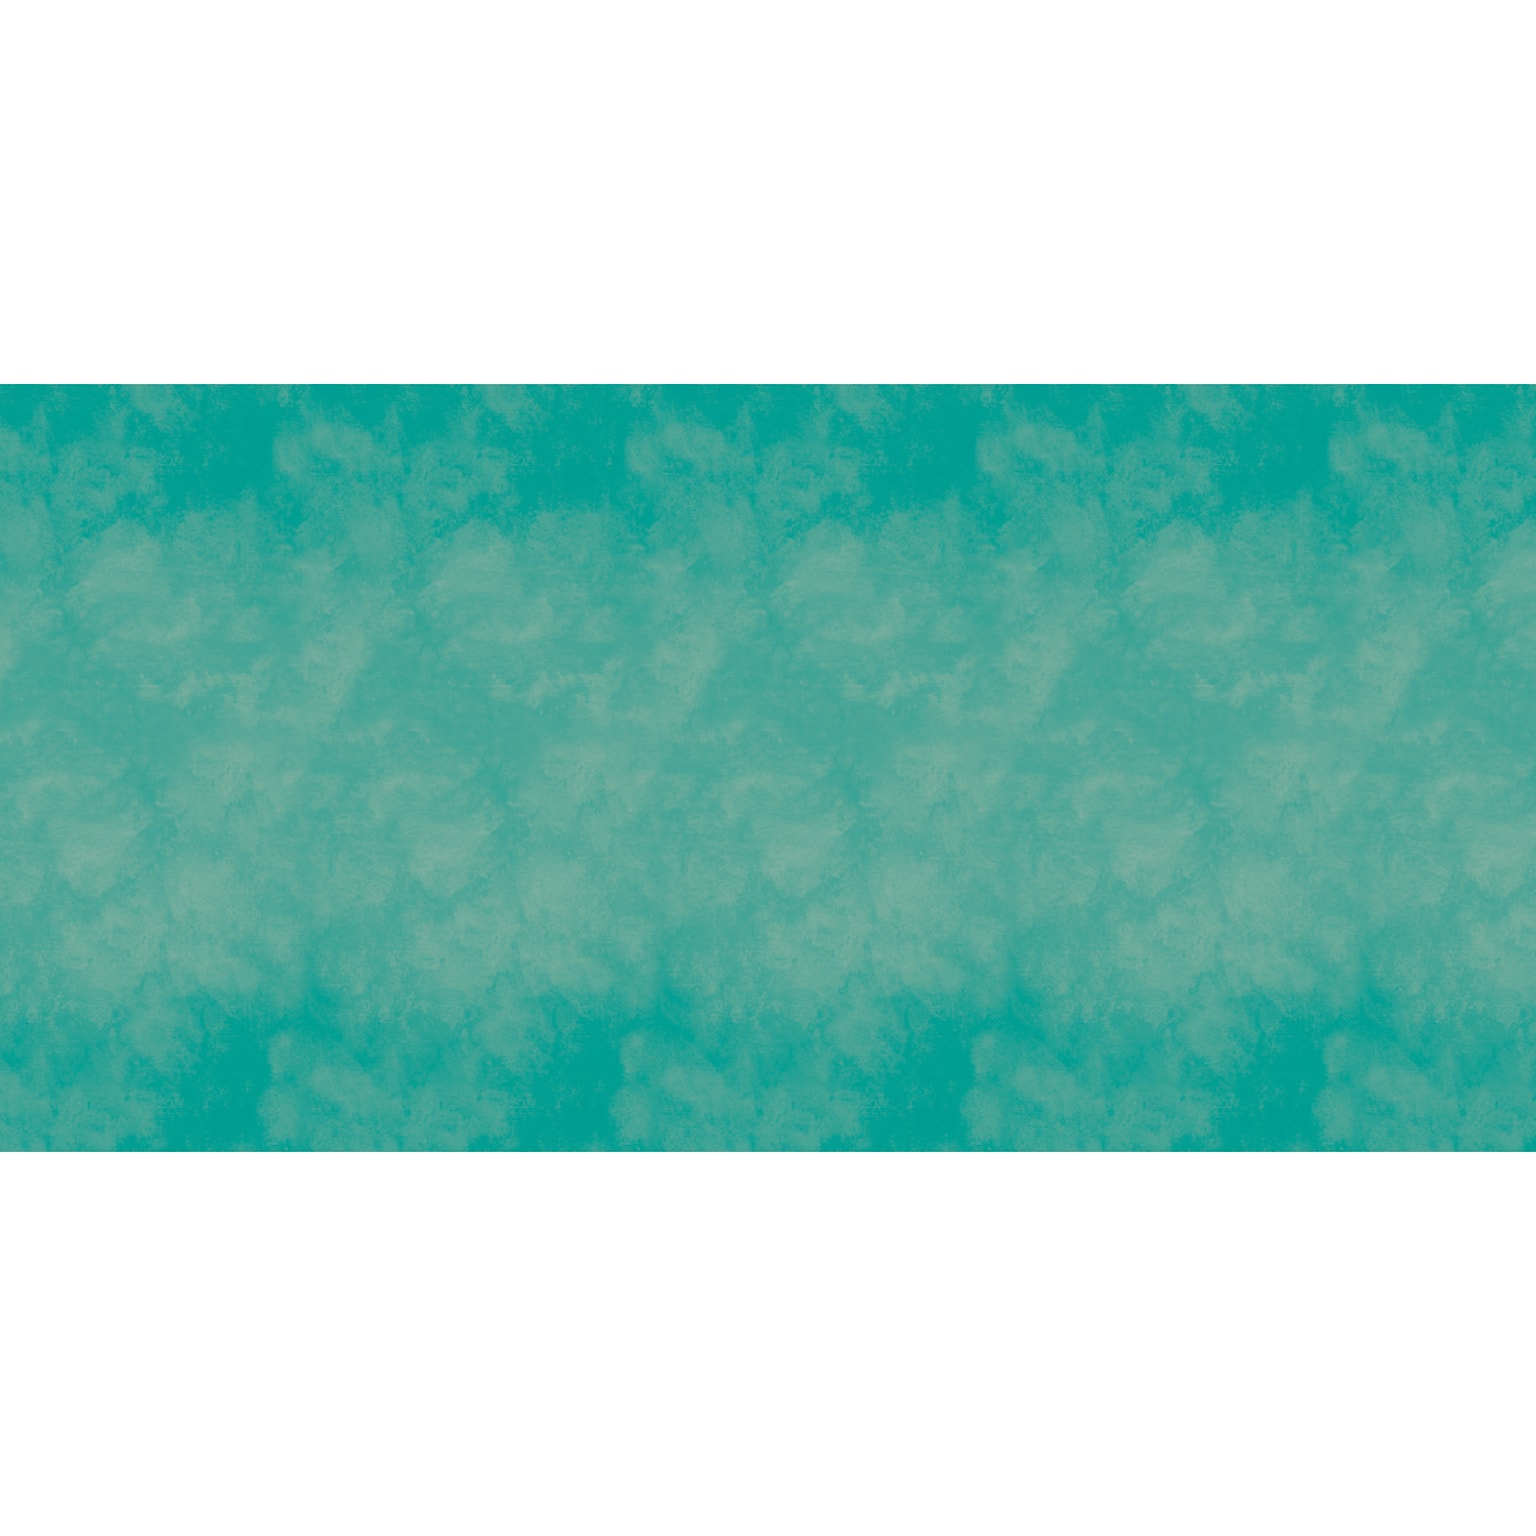 Fadeless Bulletin Board Art Paper, 48 x 50, Color Wash Turquoise (PAC56815)